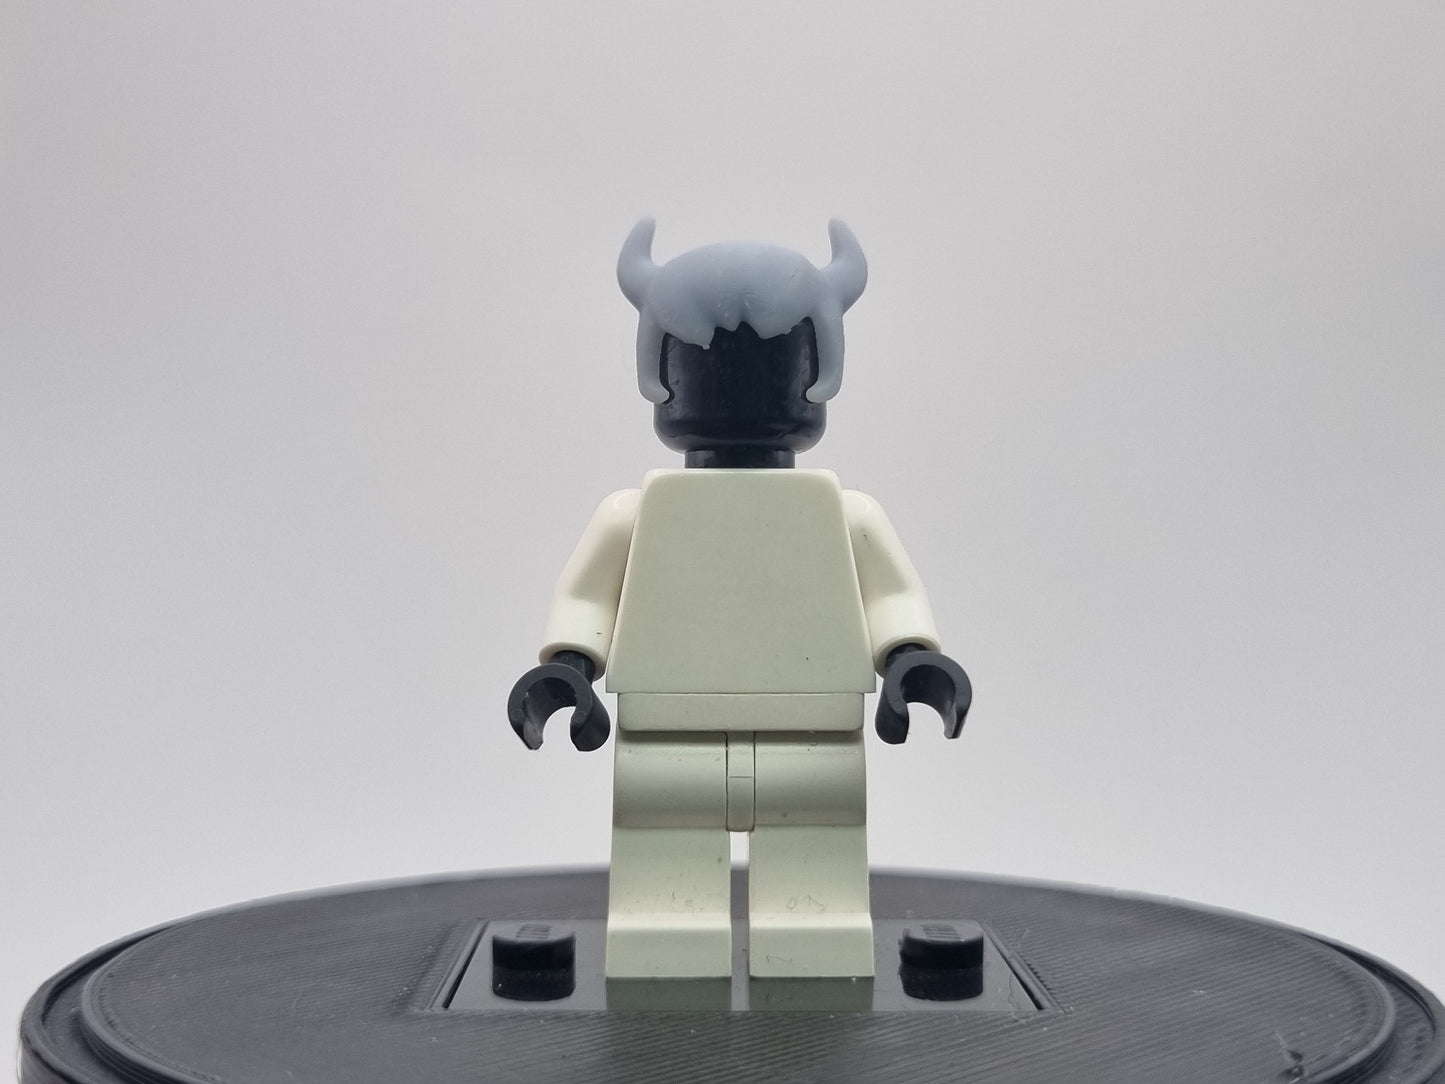 Building toy custom 3D printed small horned hero!